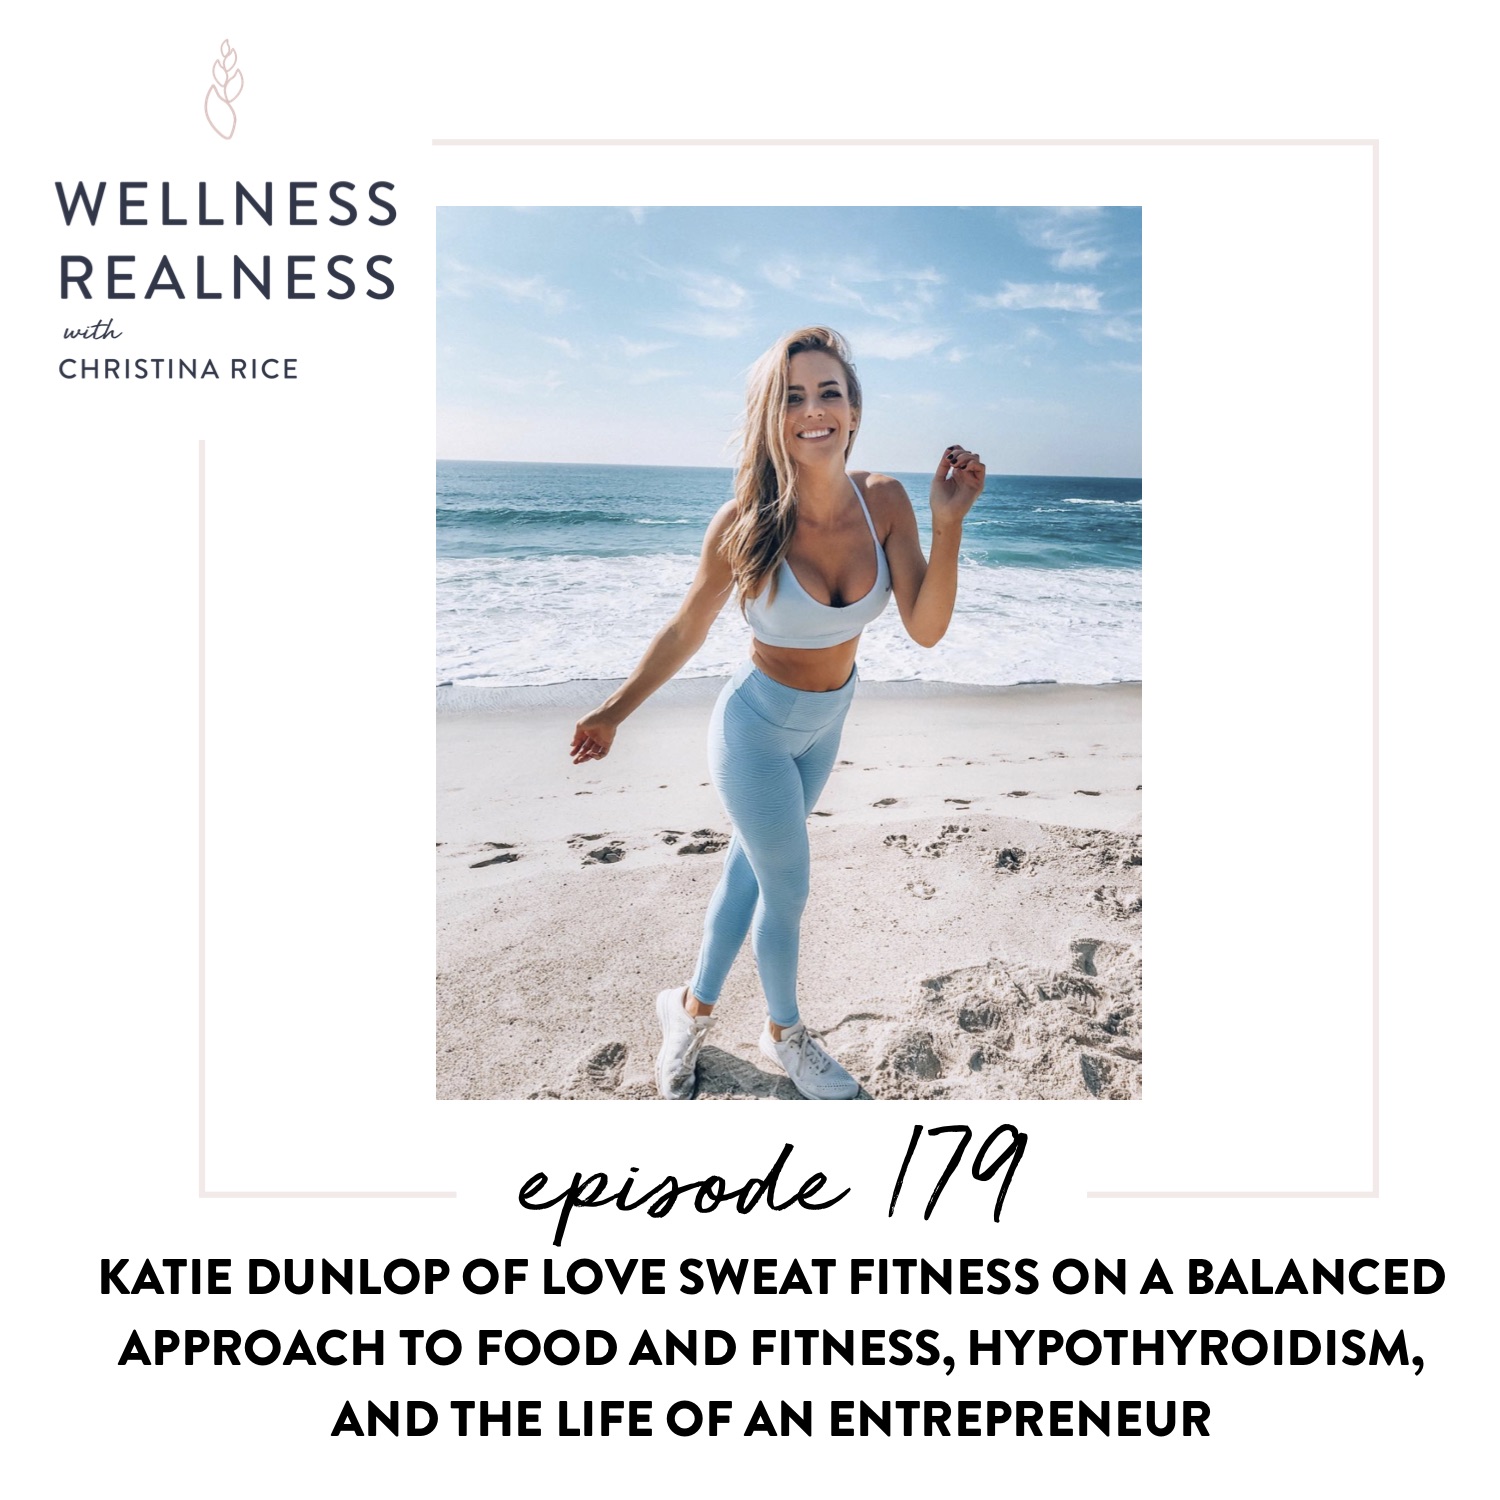 179: Katie Dunlop of Love Sweat Fitness on a Balanced Approach to Food and Fitness, Hypothyroidism, and the Life of an Entrepreneur